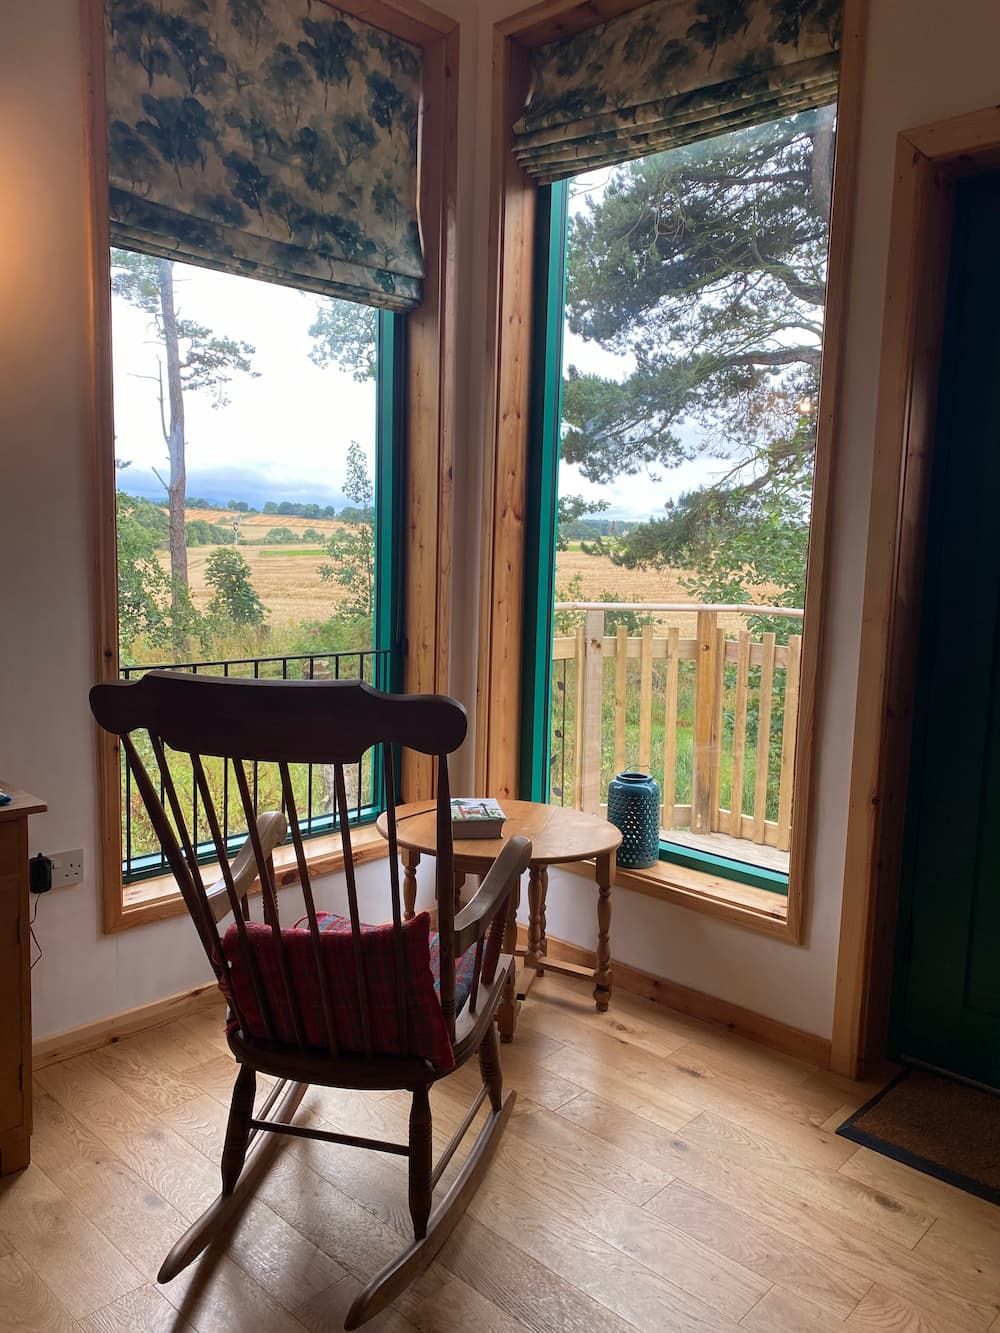 Standing behind a rocking chair overlooking the fields of Northumberland out of the window